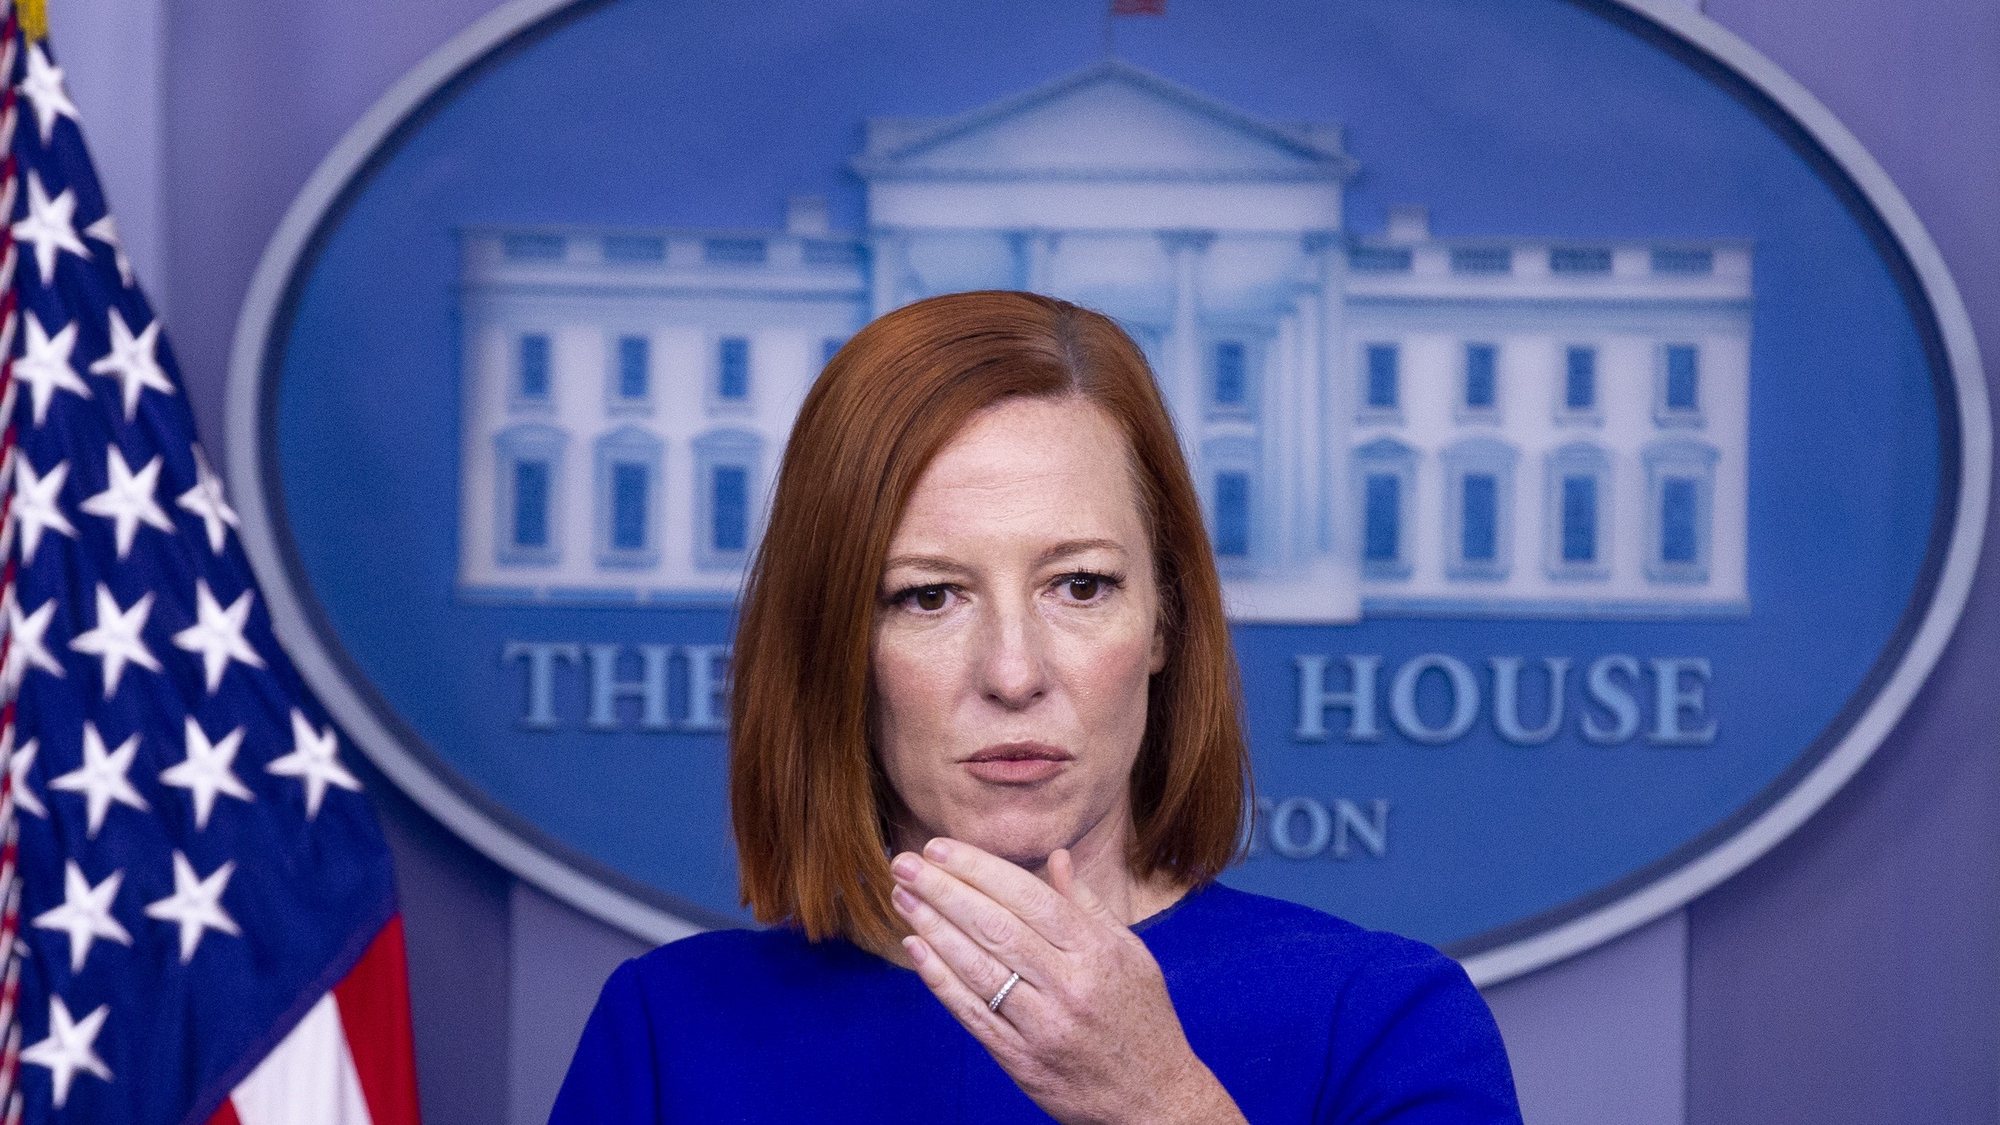 epa09627965 White House Press Secretary Jen Psaki participates in a news conference during which she took questions on US President Joe Biden&#039;s two-hour video call with President of Russia Vladimir Putin, in the James Brady Press Briefing Room of the White House, in Washington, DC, USA, 07 December 2021. Biden held the video call with Putin to discuss Russia&#039;s military build-up on Ukraine&#039;s borders. Following the video call, Biden convened a call with several close European allies to discuss the situation in Ukraine.  EPA/MICHAEL REYNOLDS / POOL